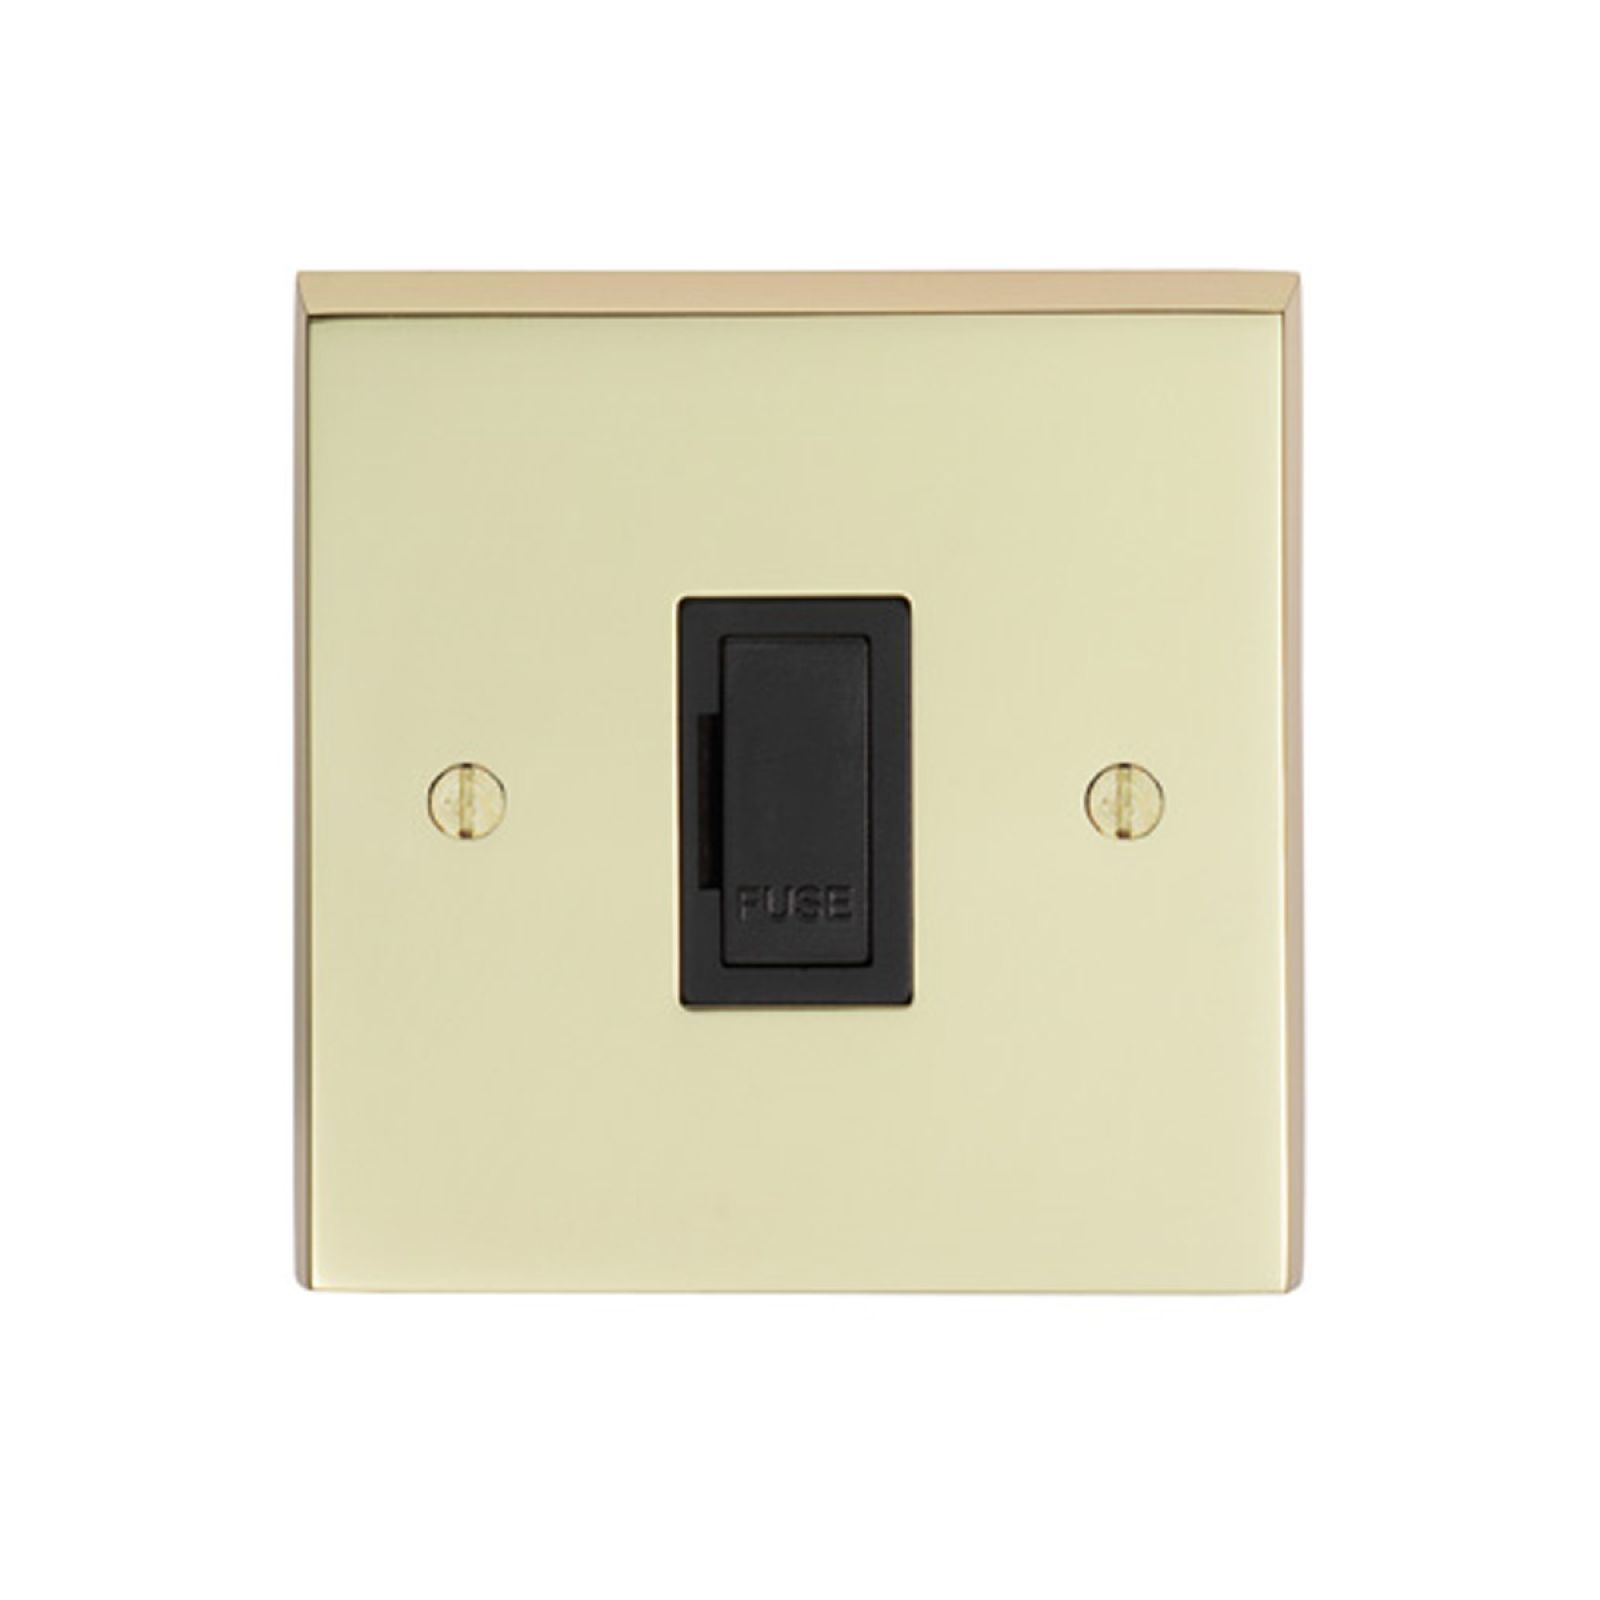 13amp Unswitched Fuse Spur in brass, chrome or satin chrome